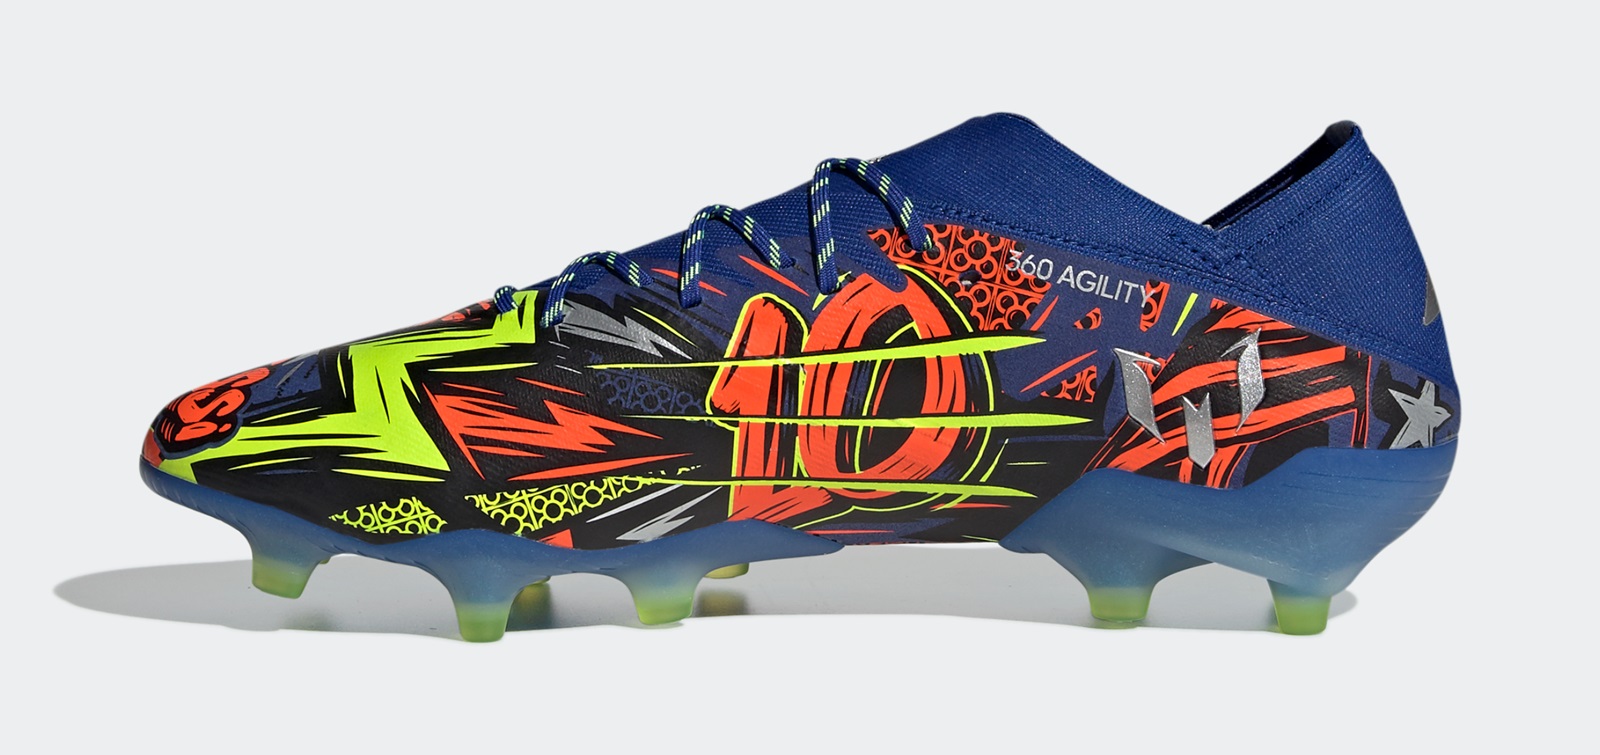 Messi shows off brand new Adidas boots in 2020/21 season price, design